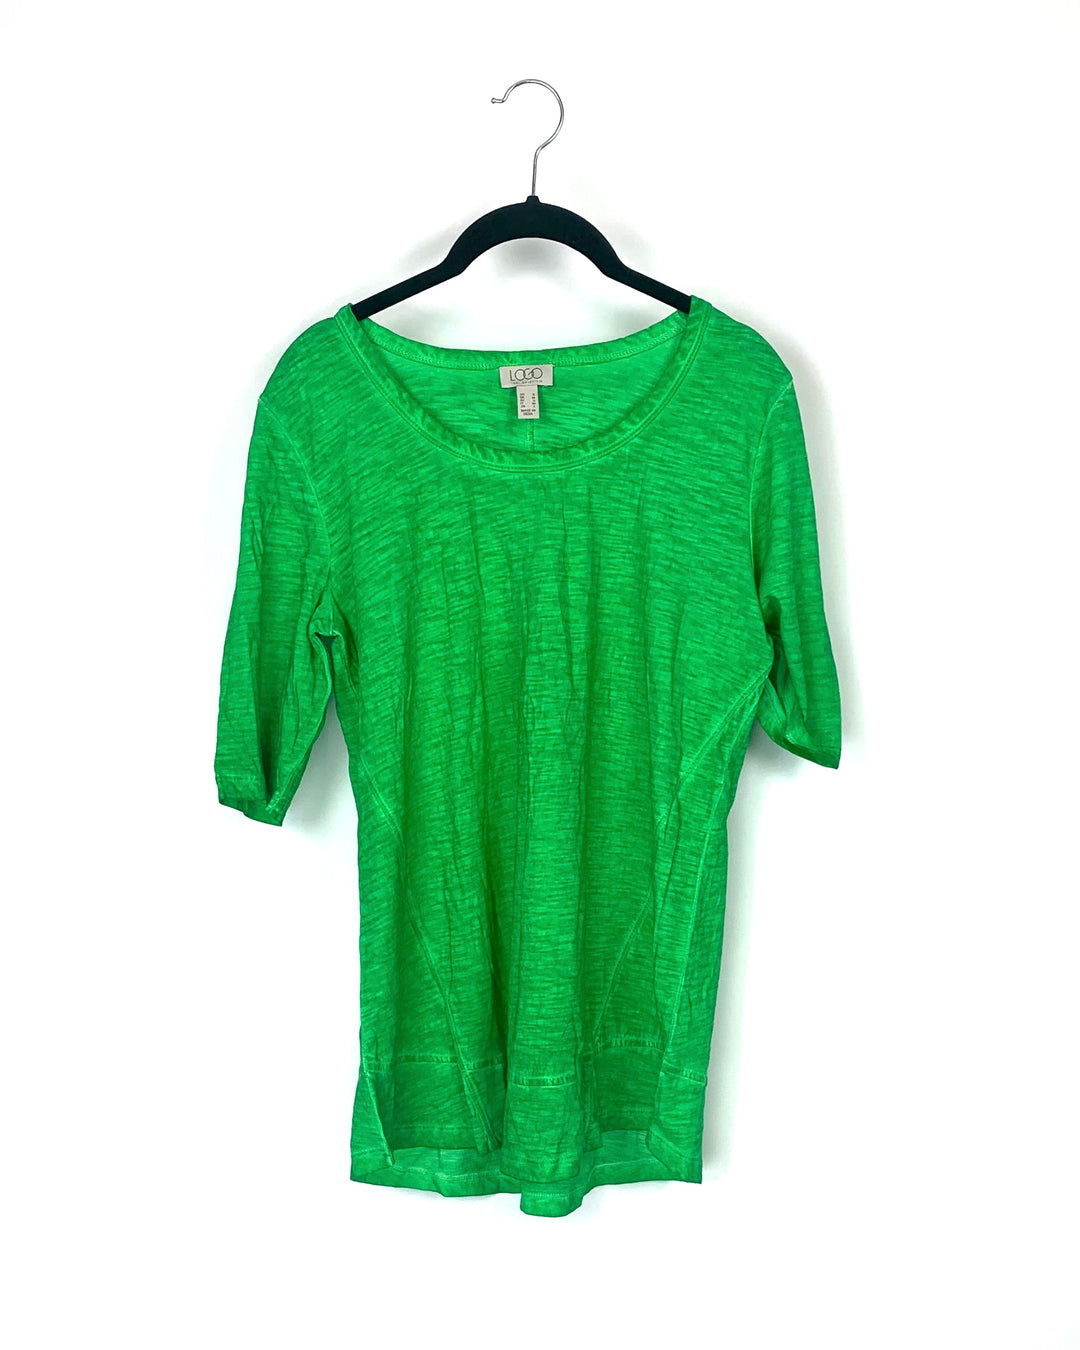 Green Top - Small